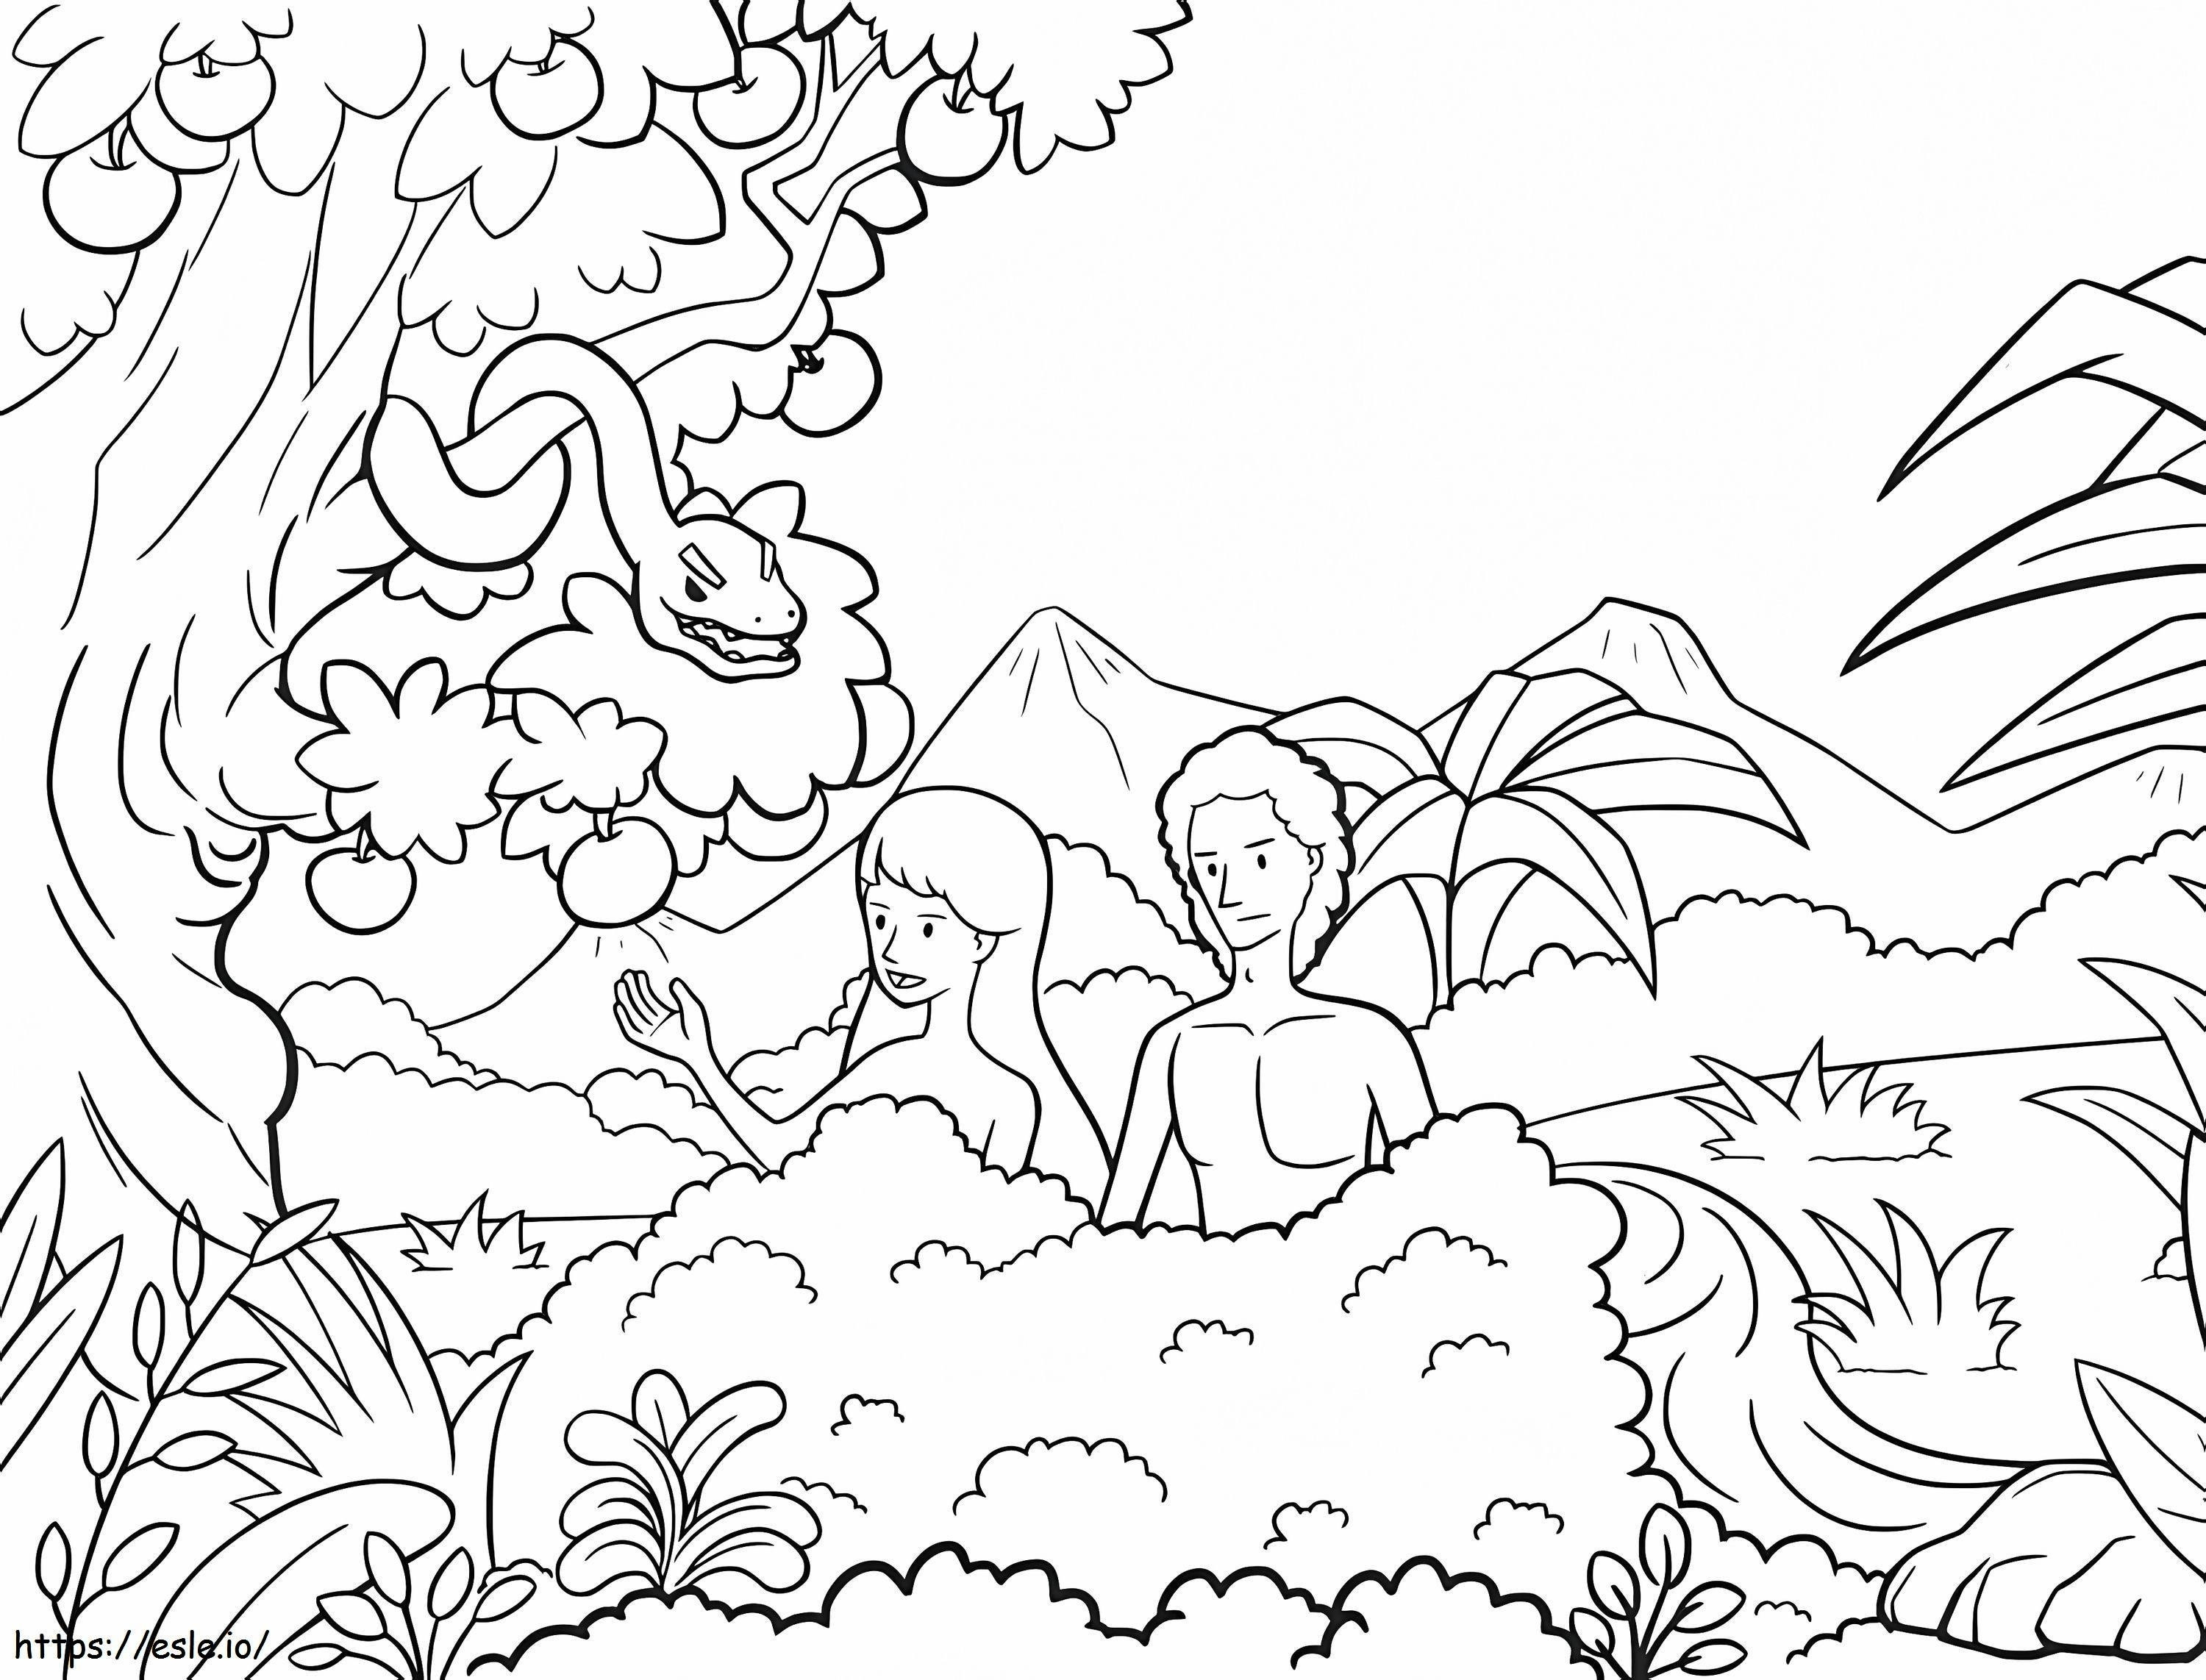 Adam And Eve Tempted By The Serpent coloring page